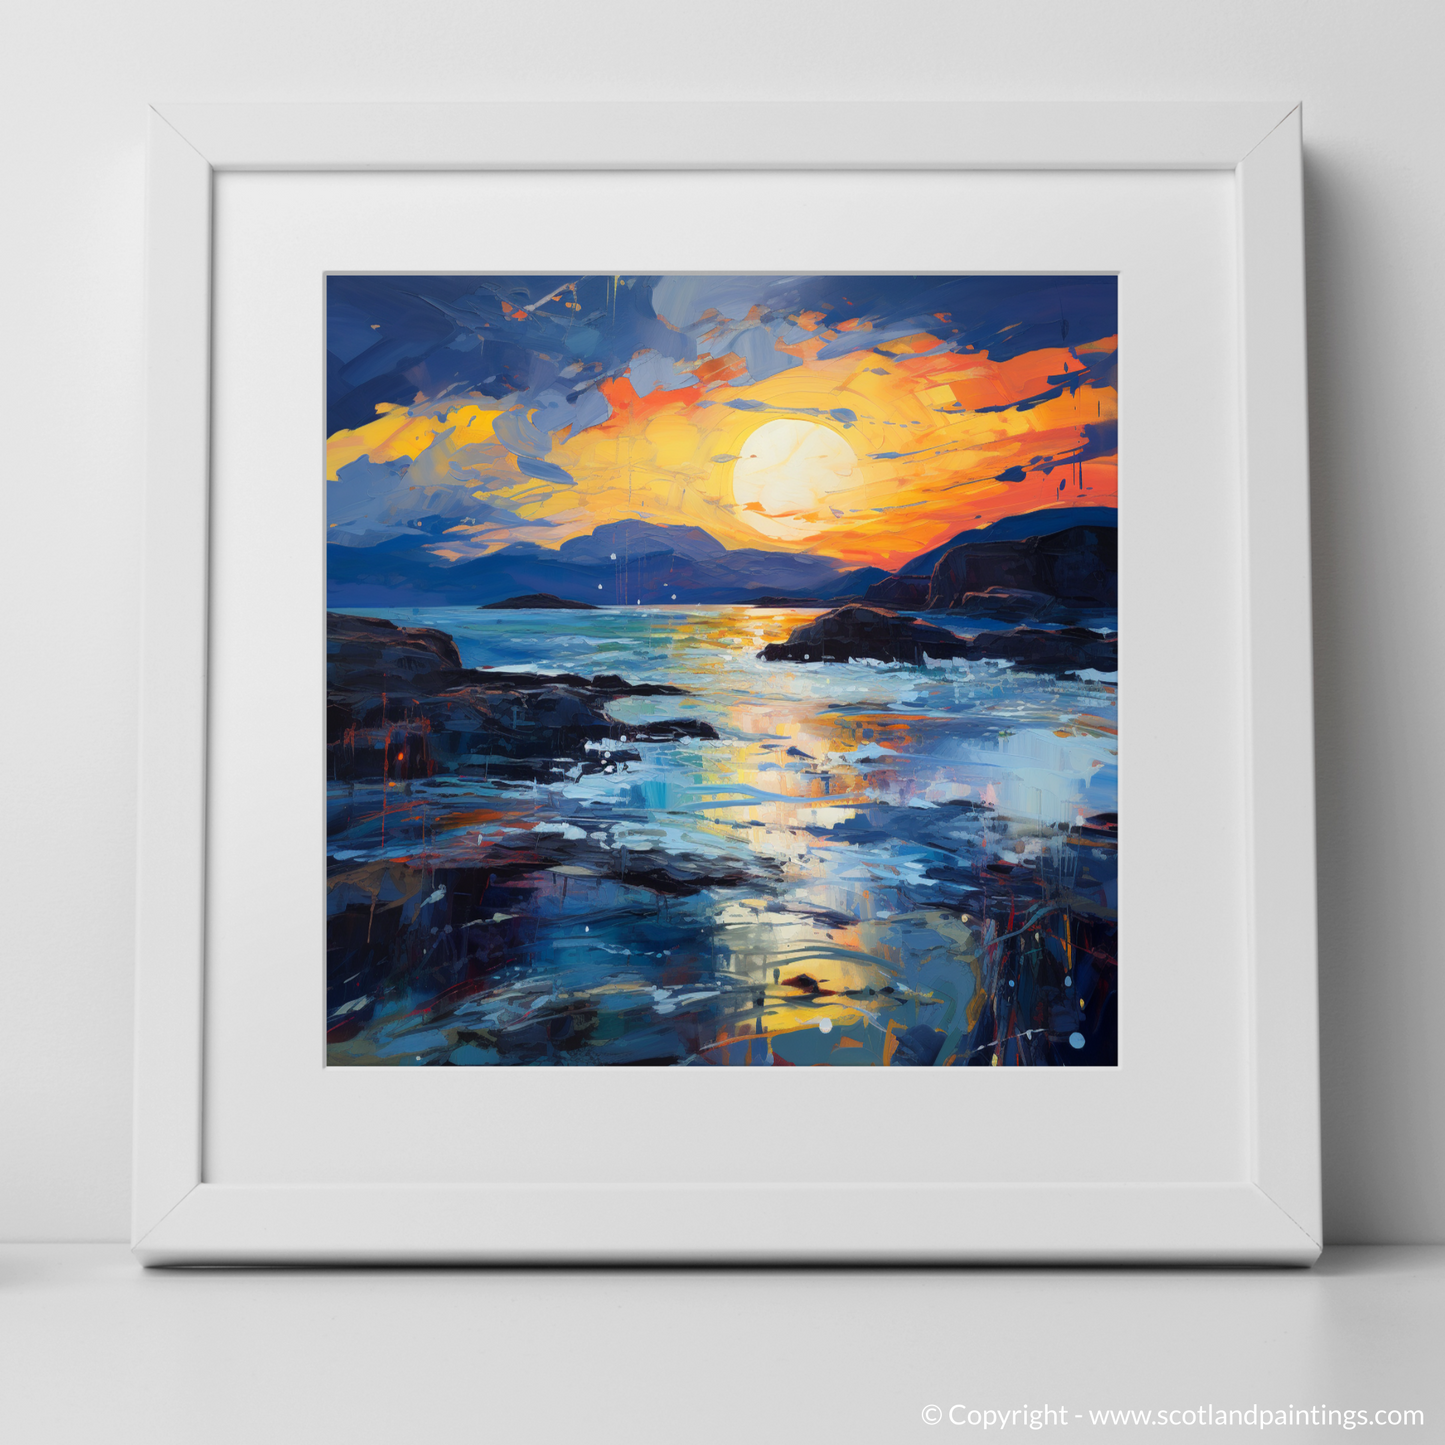 Art Print of Sound of Iona at dusk with a white frame